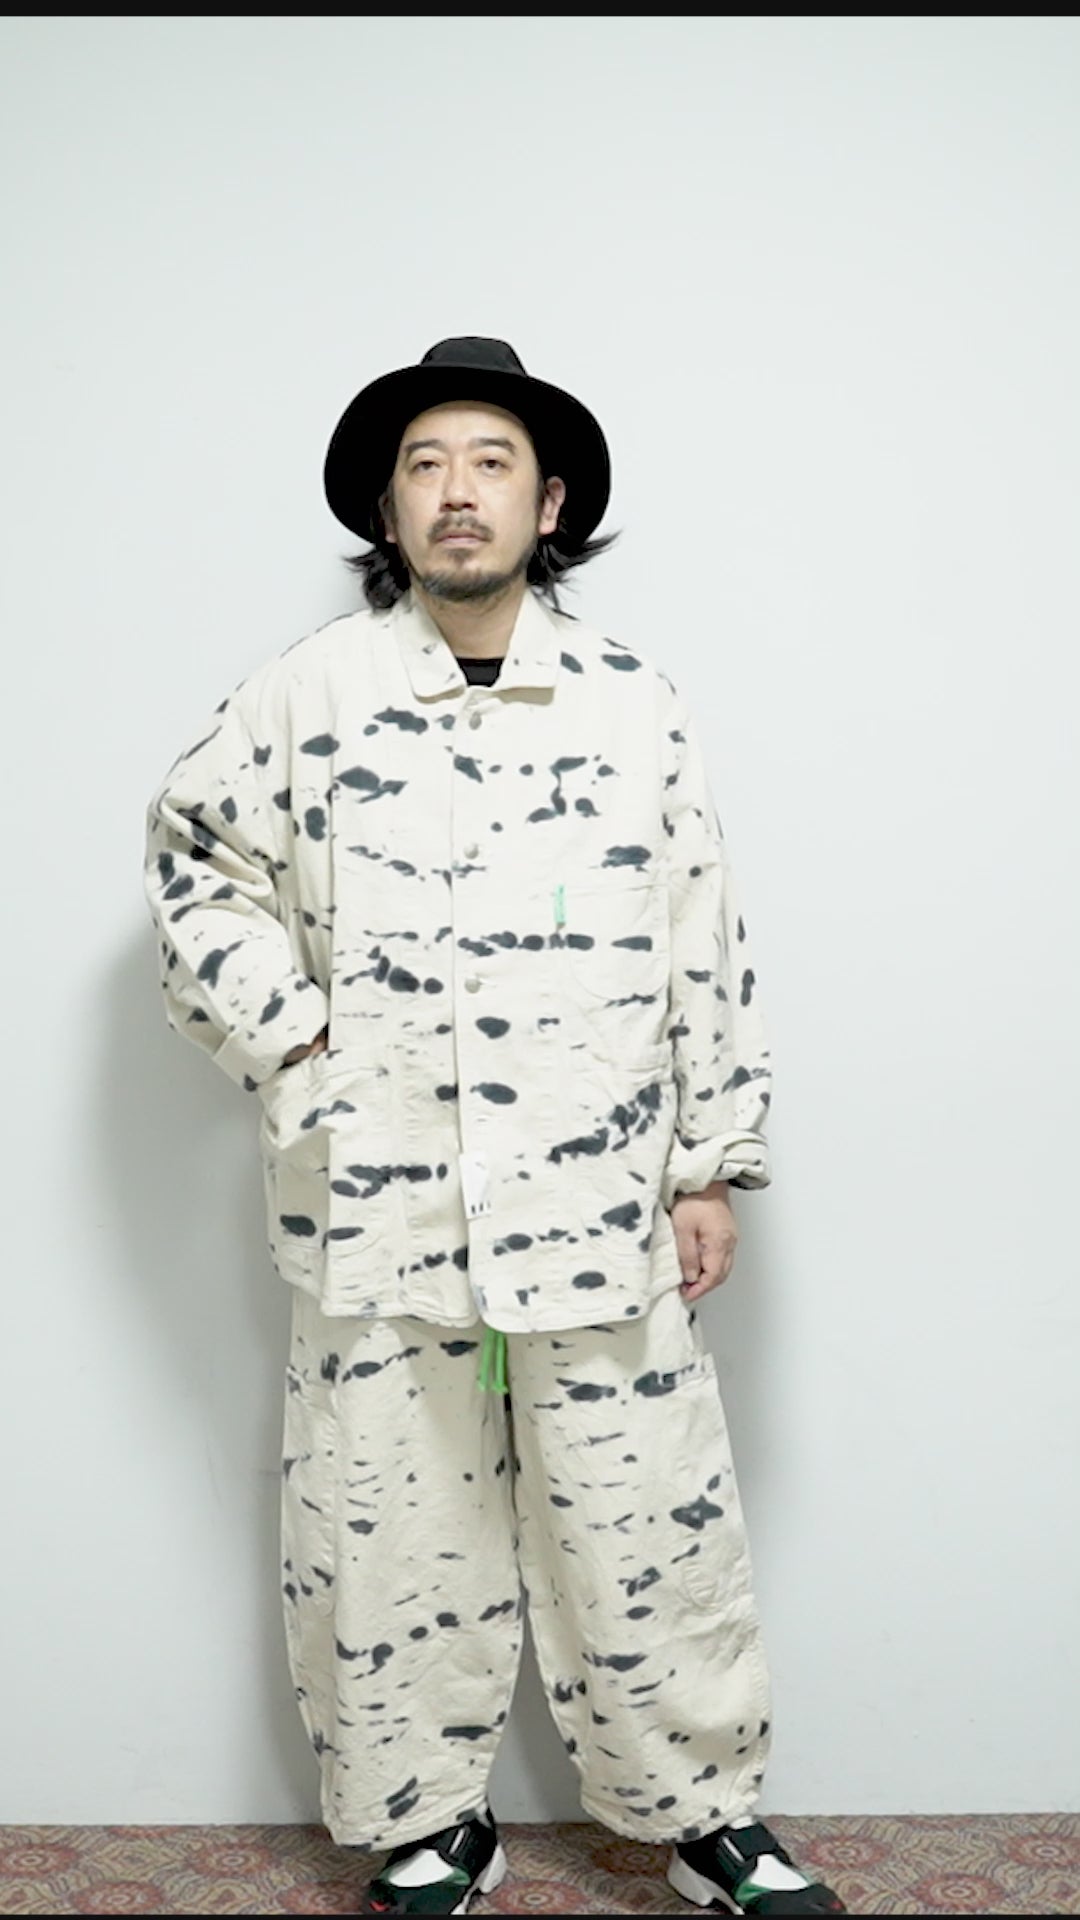 No:me-02 | Name:FORAGER COAT | Color:Blue Cheese【MEALS CLOTHING_